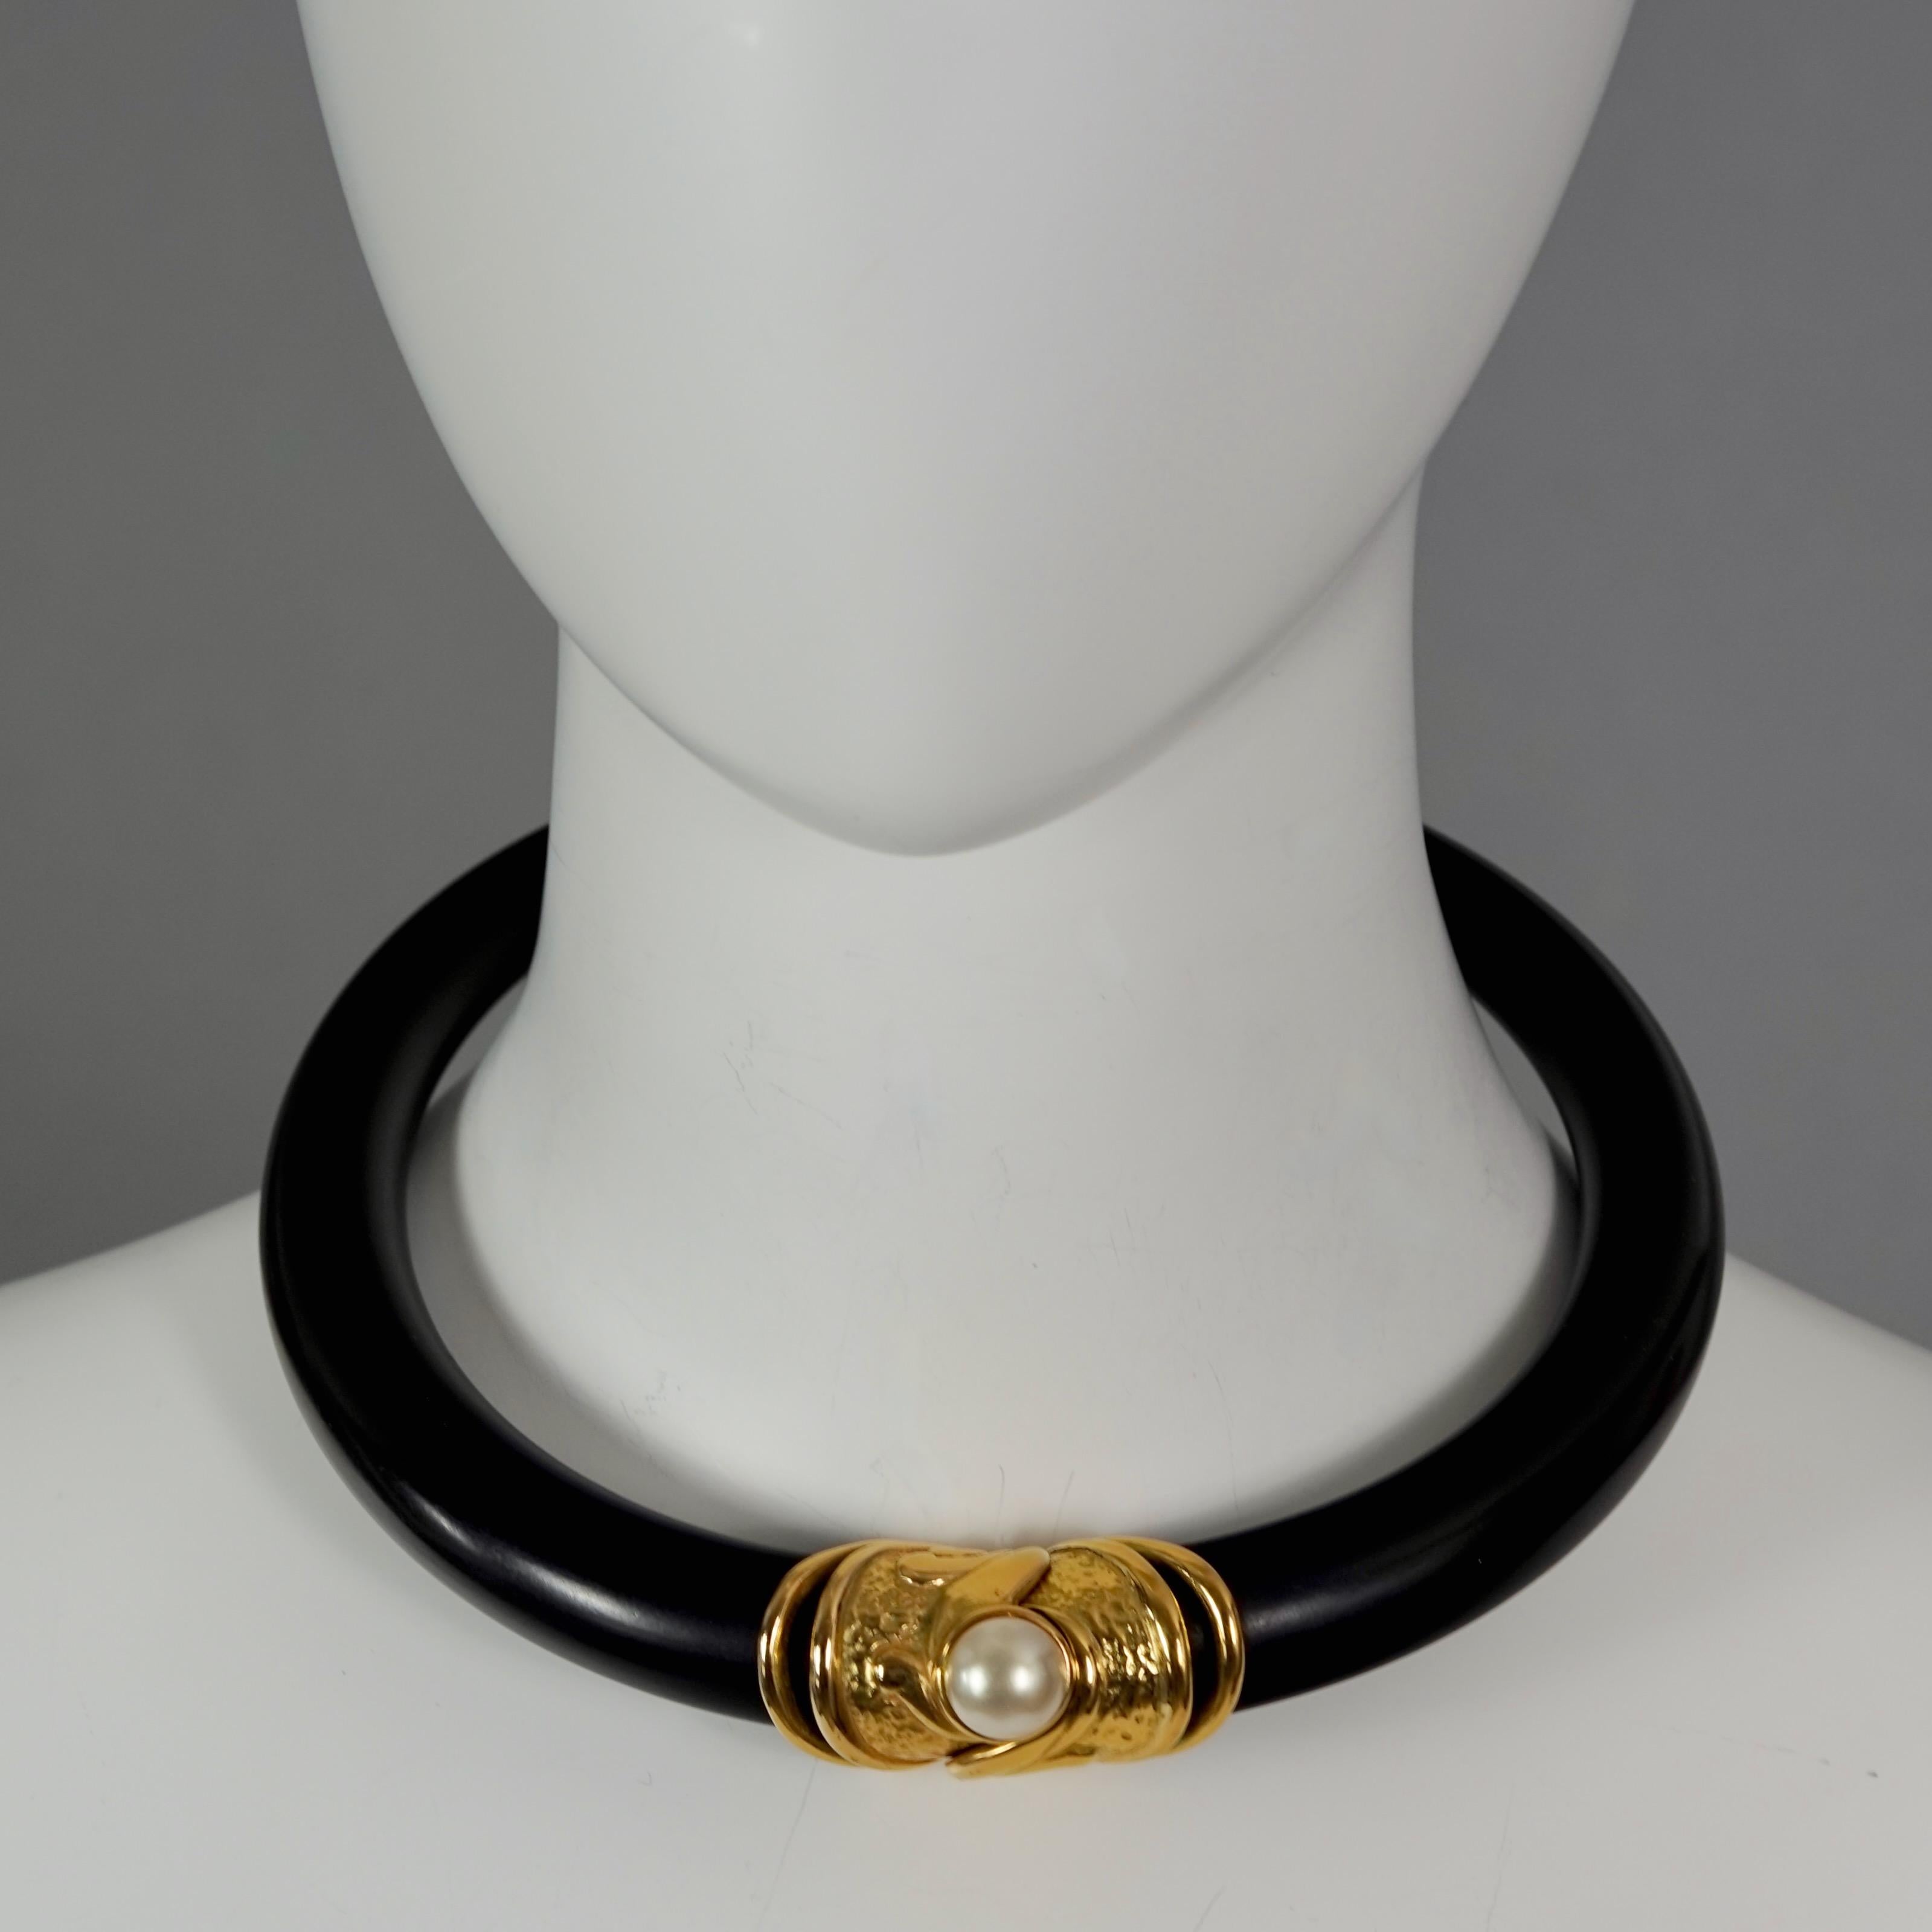 Vintage NINA RICCI Pearl Wood Illusion Resin Rigid Choker Necklace

NECKLACE
Height: 1.18 inches (3 cm)
Wearable Length: 14.96 inches (38 cm)
Depth: 0.67 inch (1.7 cm)

Features:
- 100% Authentic NINA RICCI.
- Black wood illusion resin choker with